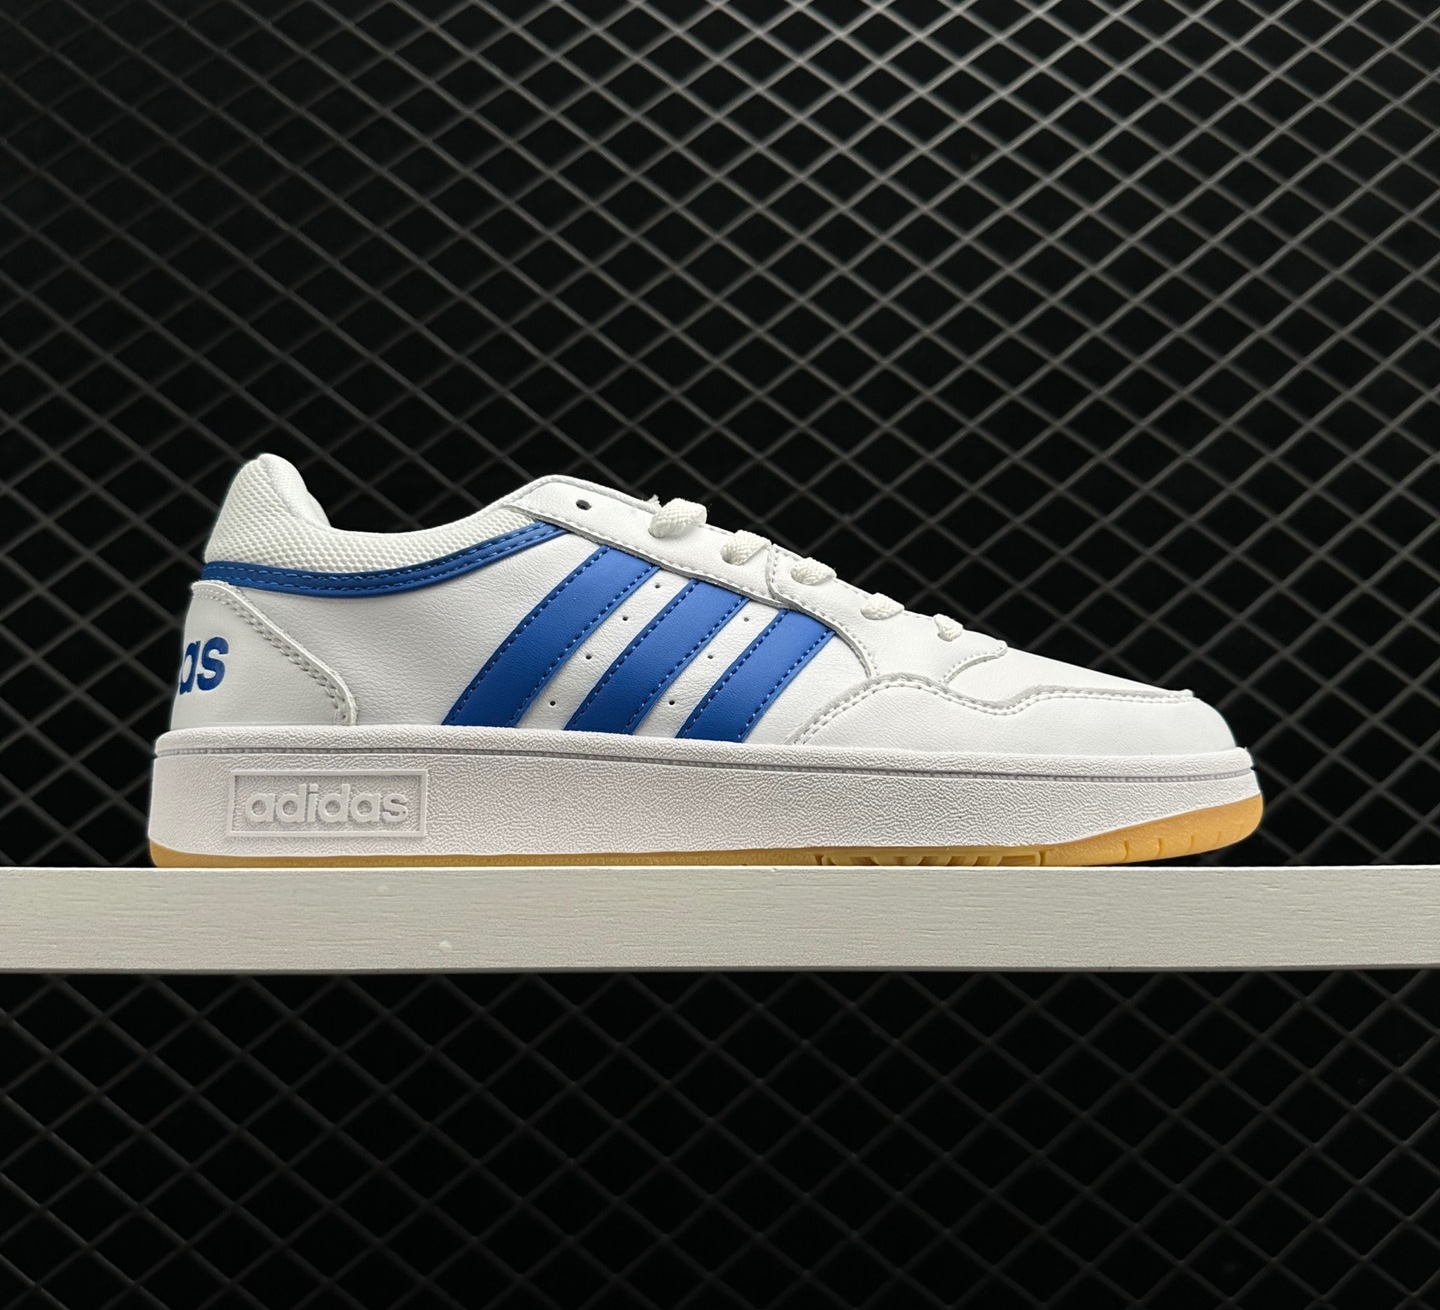 Adidas Hoops 3.0 Low Classic Vintage Shoes White Royal Blue GY5435